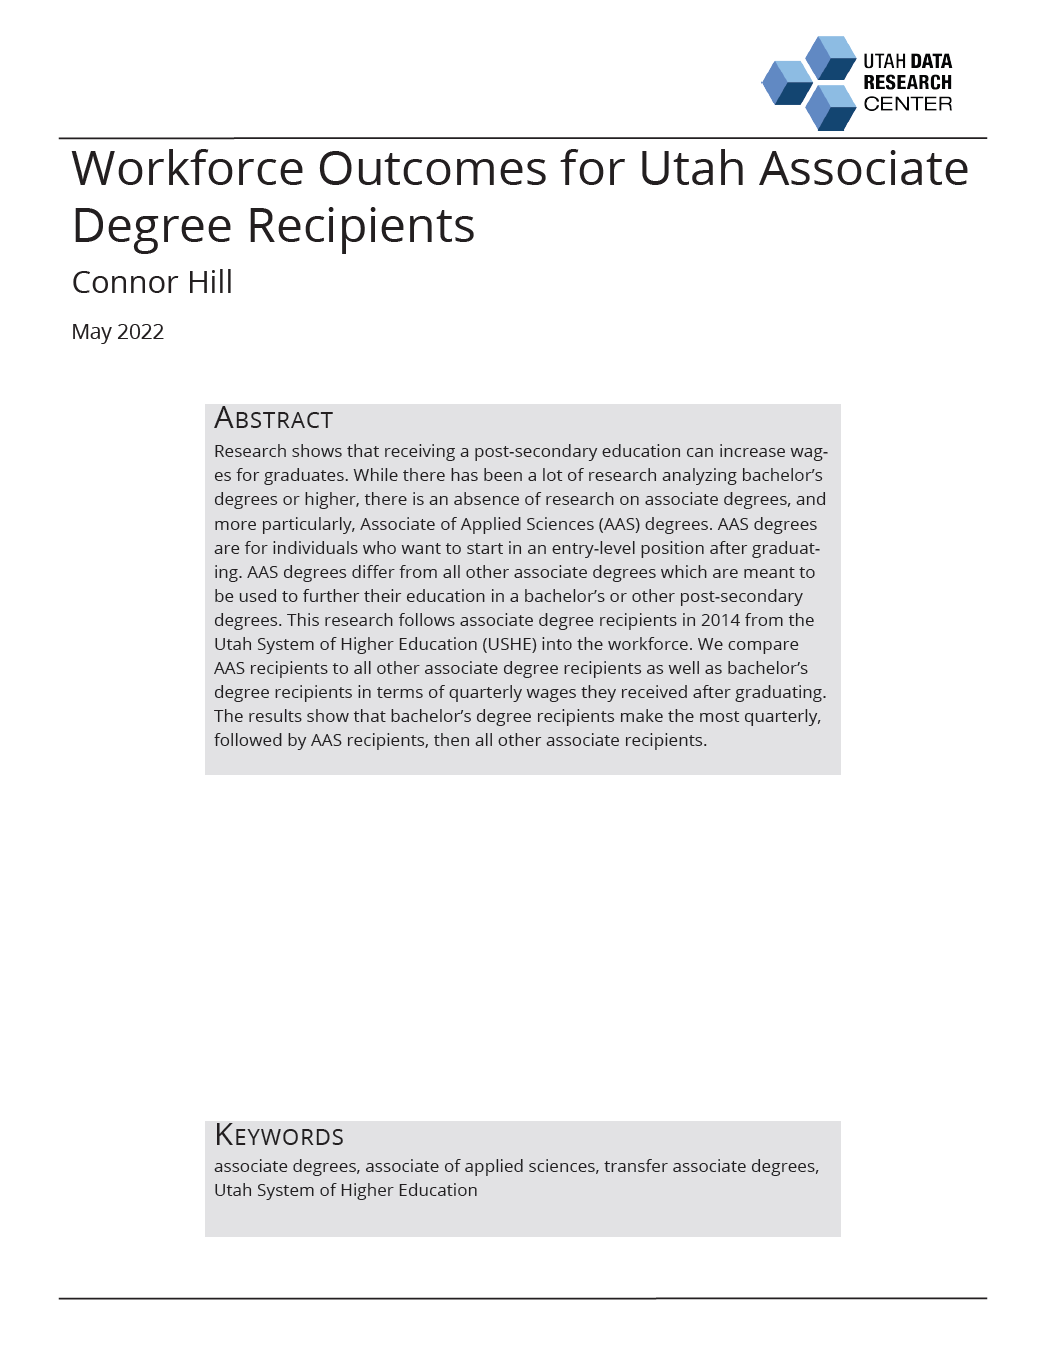 Workforce outcomes for Utah Associate Degree Receipients report cover